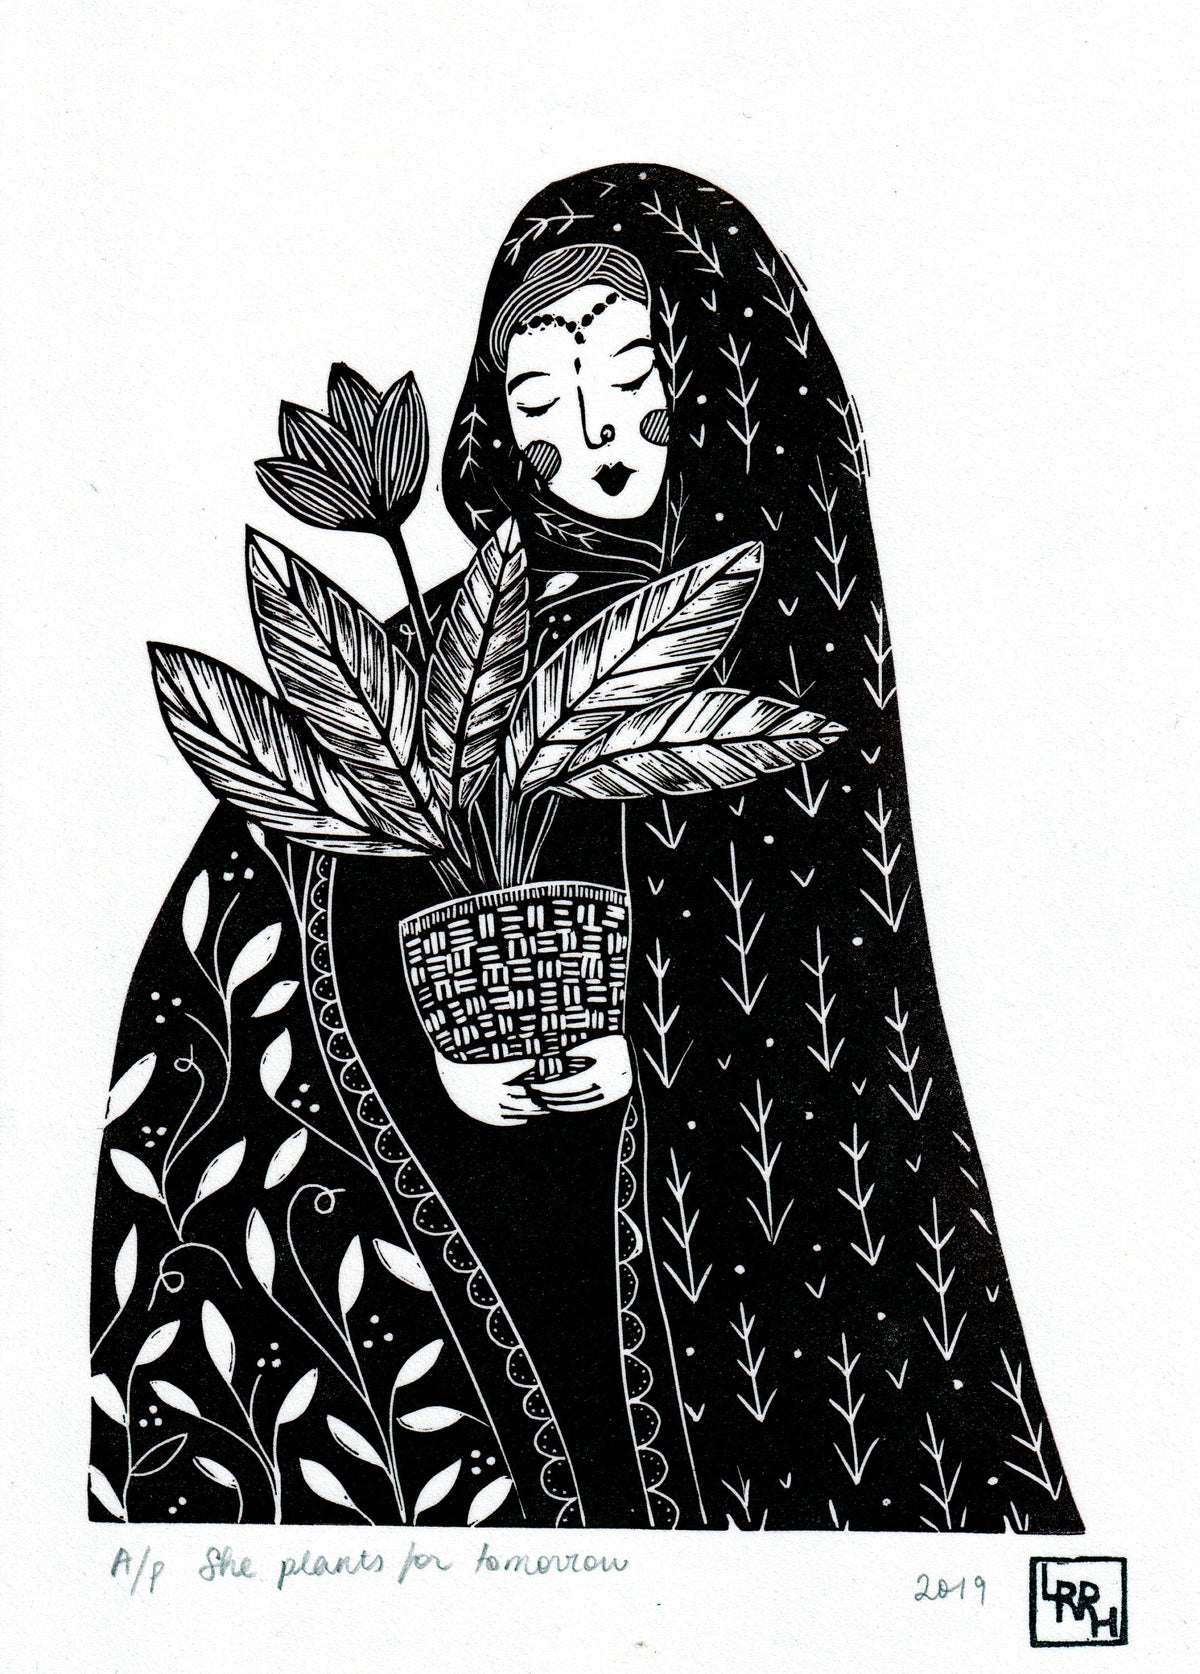 ‘She plants for tomorrow’ limited edition linoprint